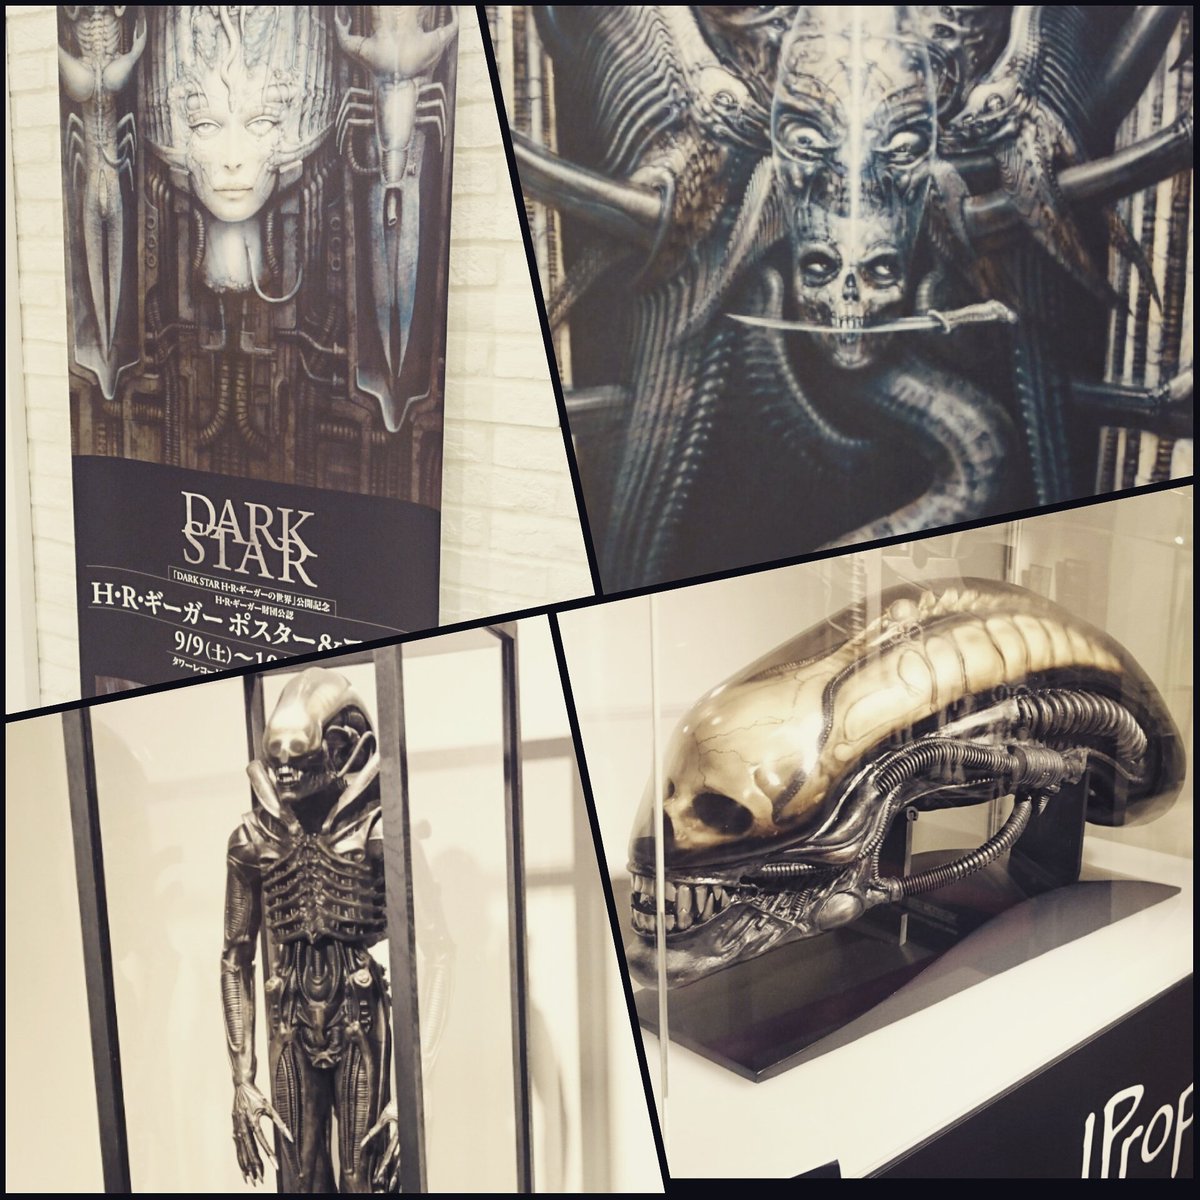 H.R. Giger exhibition in Shibuya. Saw Alien again recently but want to watch again!
日曜日渋谷でH.R.ギーガーの展示会に行った。この一年の間、またエイリエンを観たけど、また観たくなってきた! 